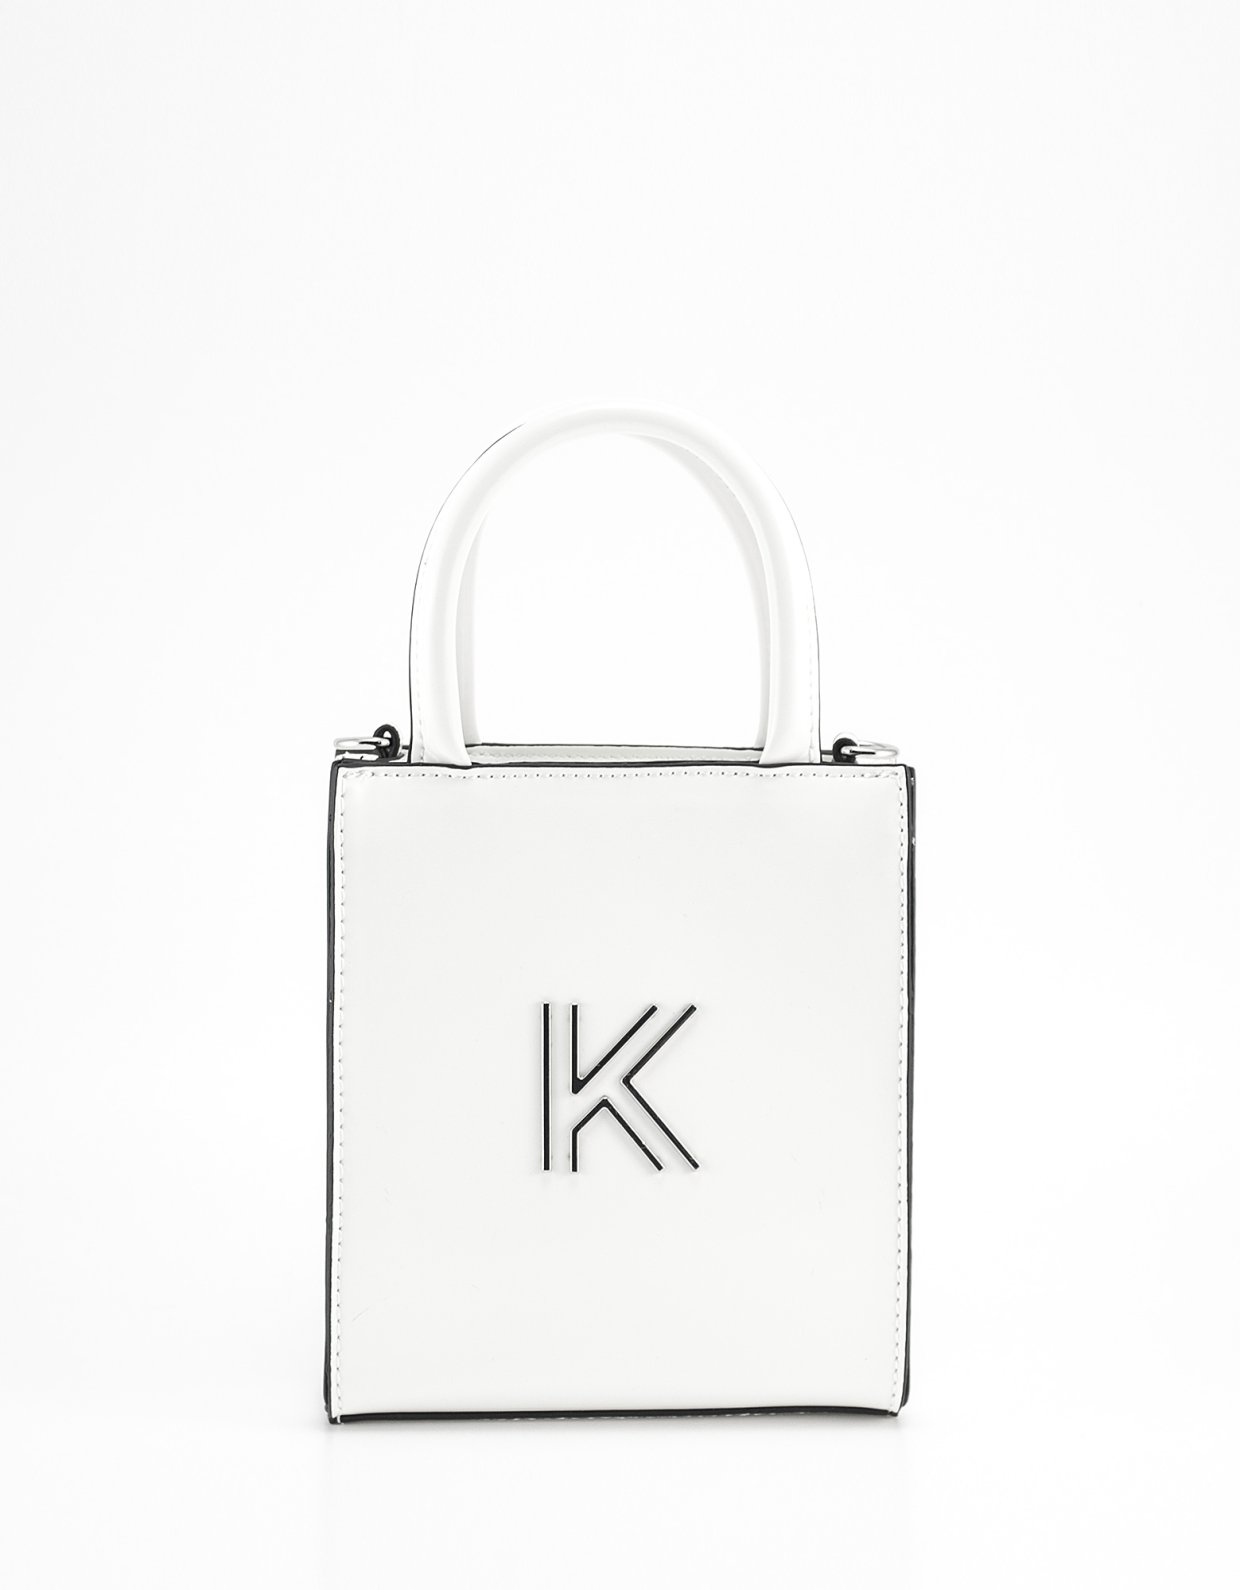 Kendall + Kylie Switzerland tote bag white